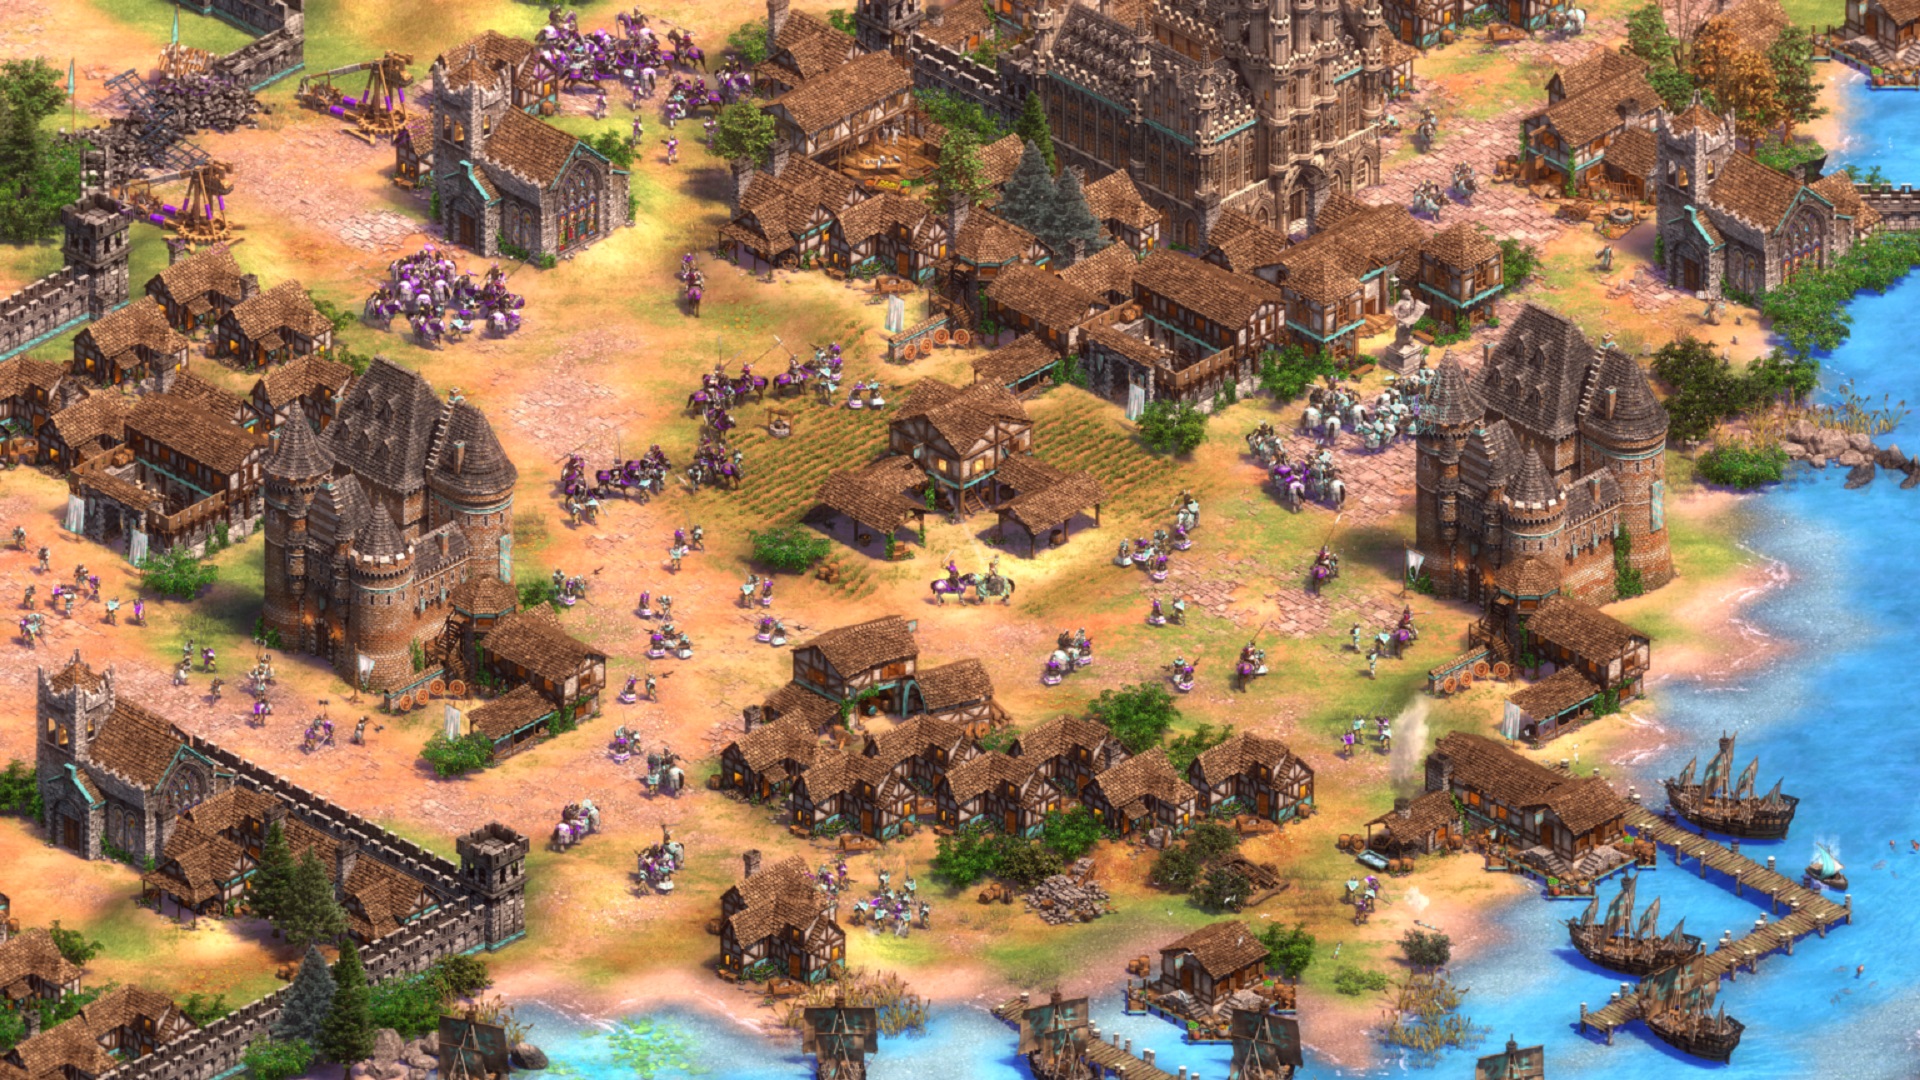 Age of Empires 2 DE’s first expansion adds new civs and campaigns PCGamesN